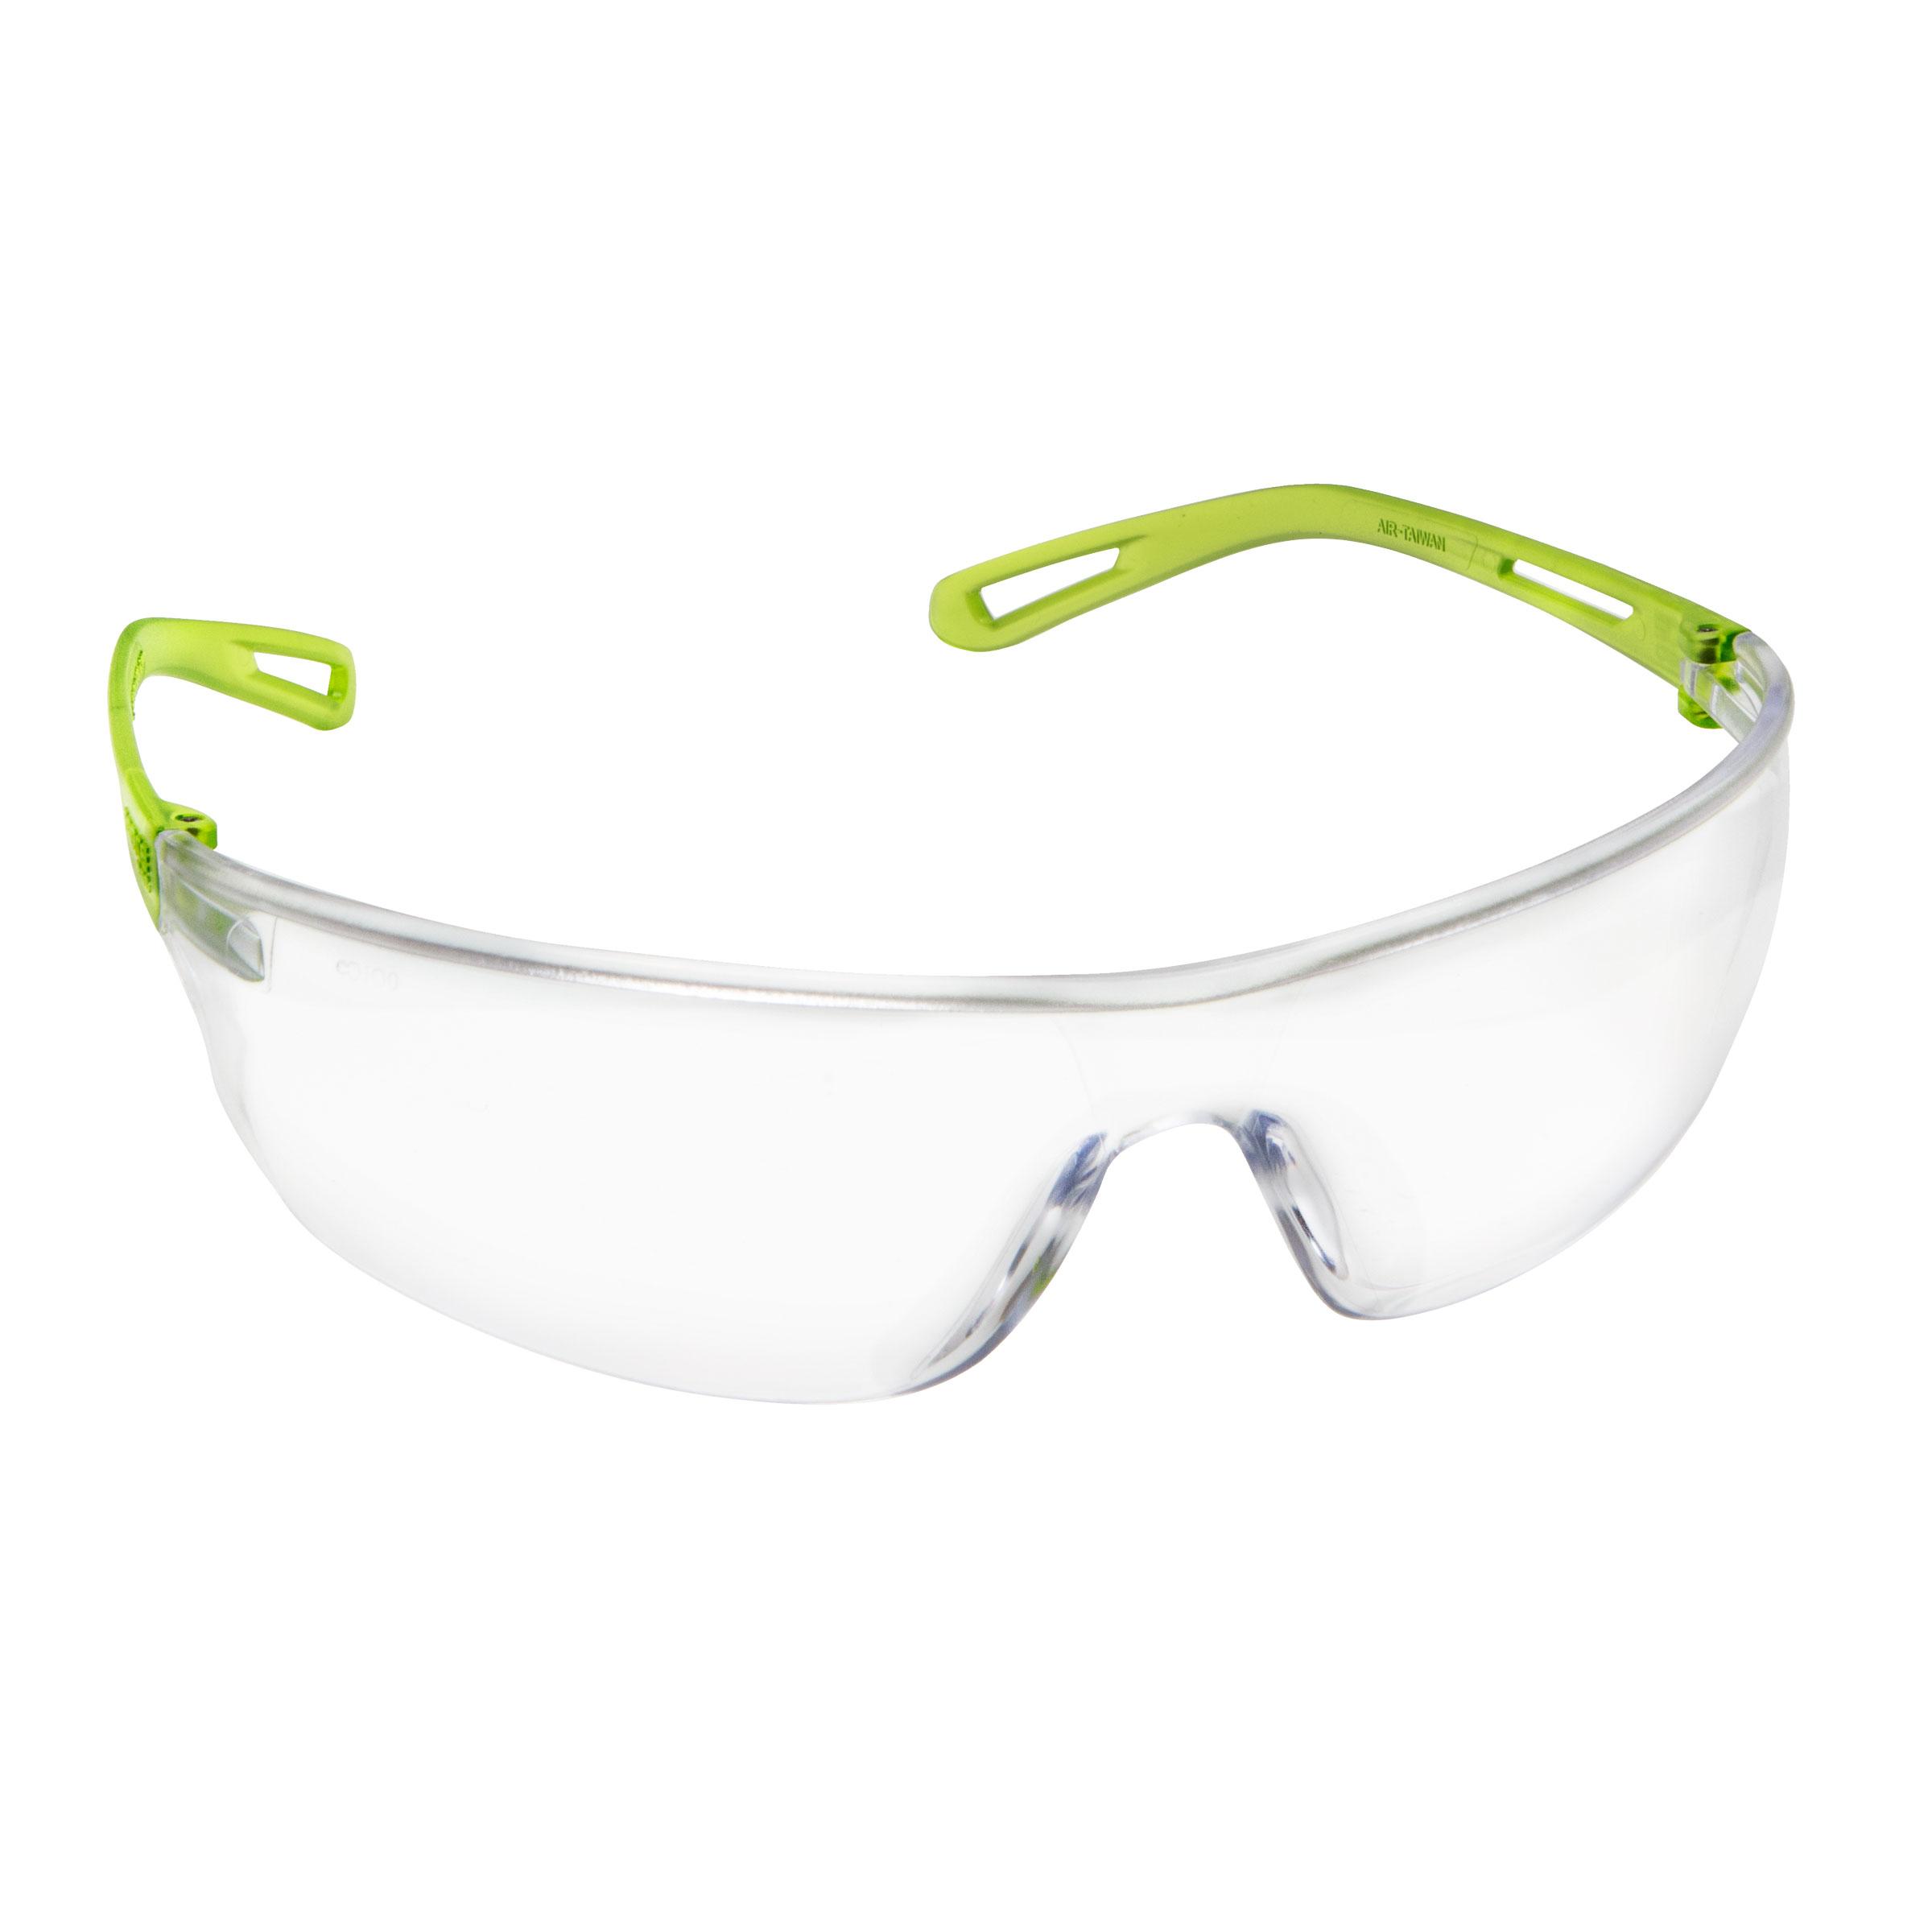 F360 Air Anti-Reflective Safety Glasses